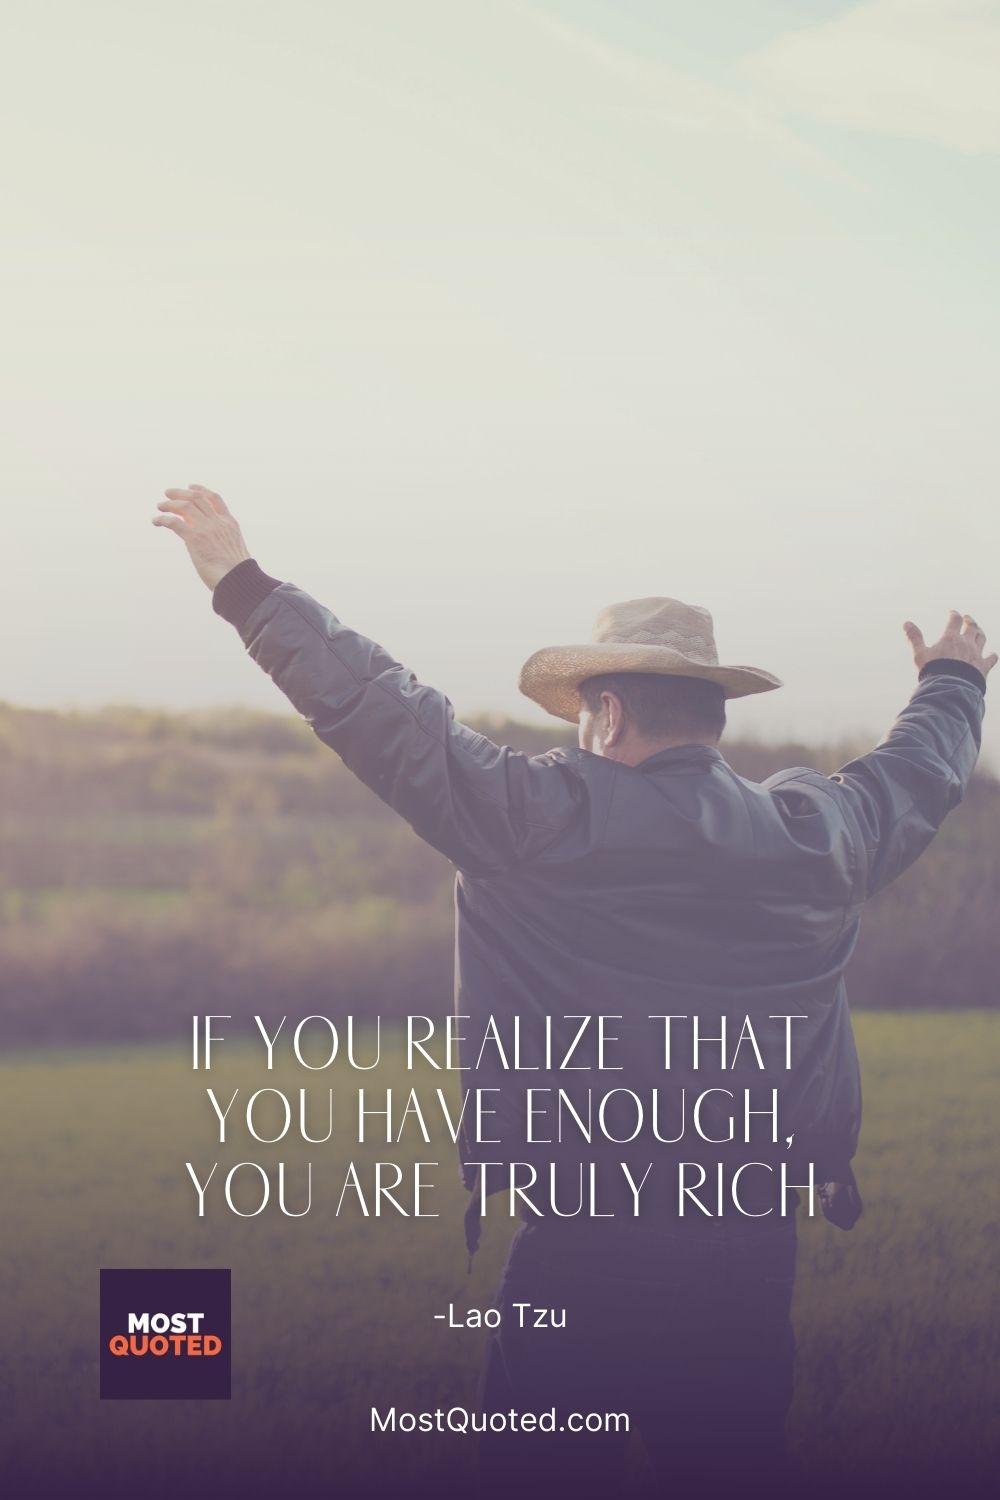 If you realize that you have enough, you are truly rich - Lao Tzu